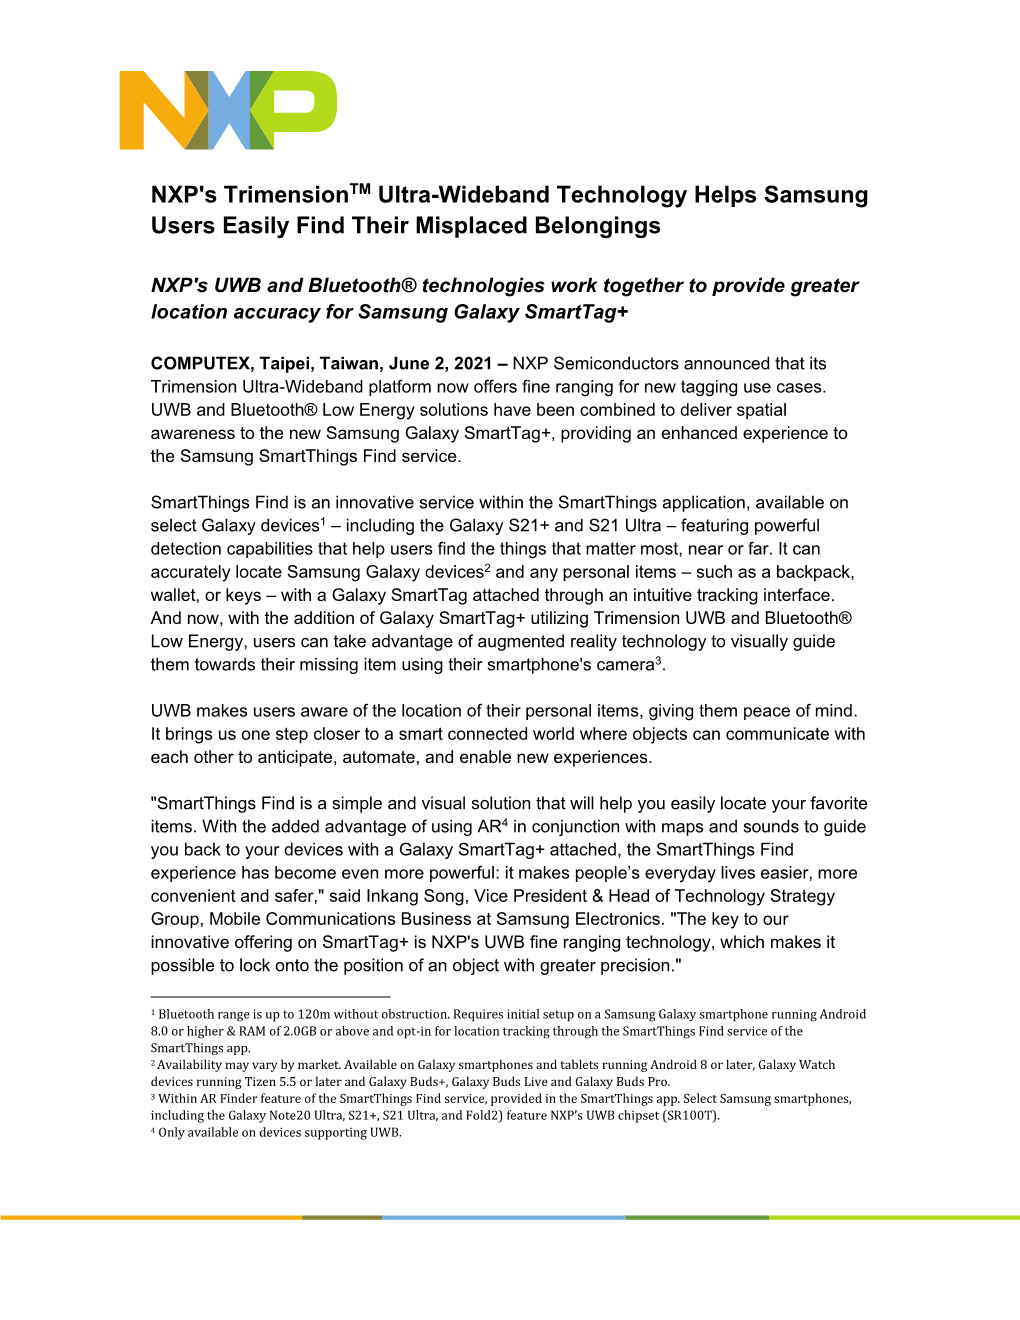 NXP's Trimensiontm Ultra-Wideband Technology Helps Samsung Users Easily Find Their Misplaced Belongings